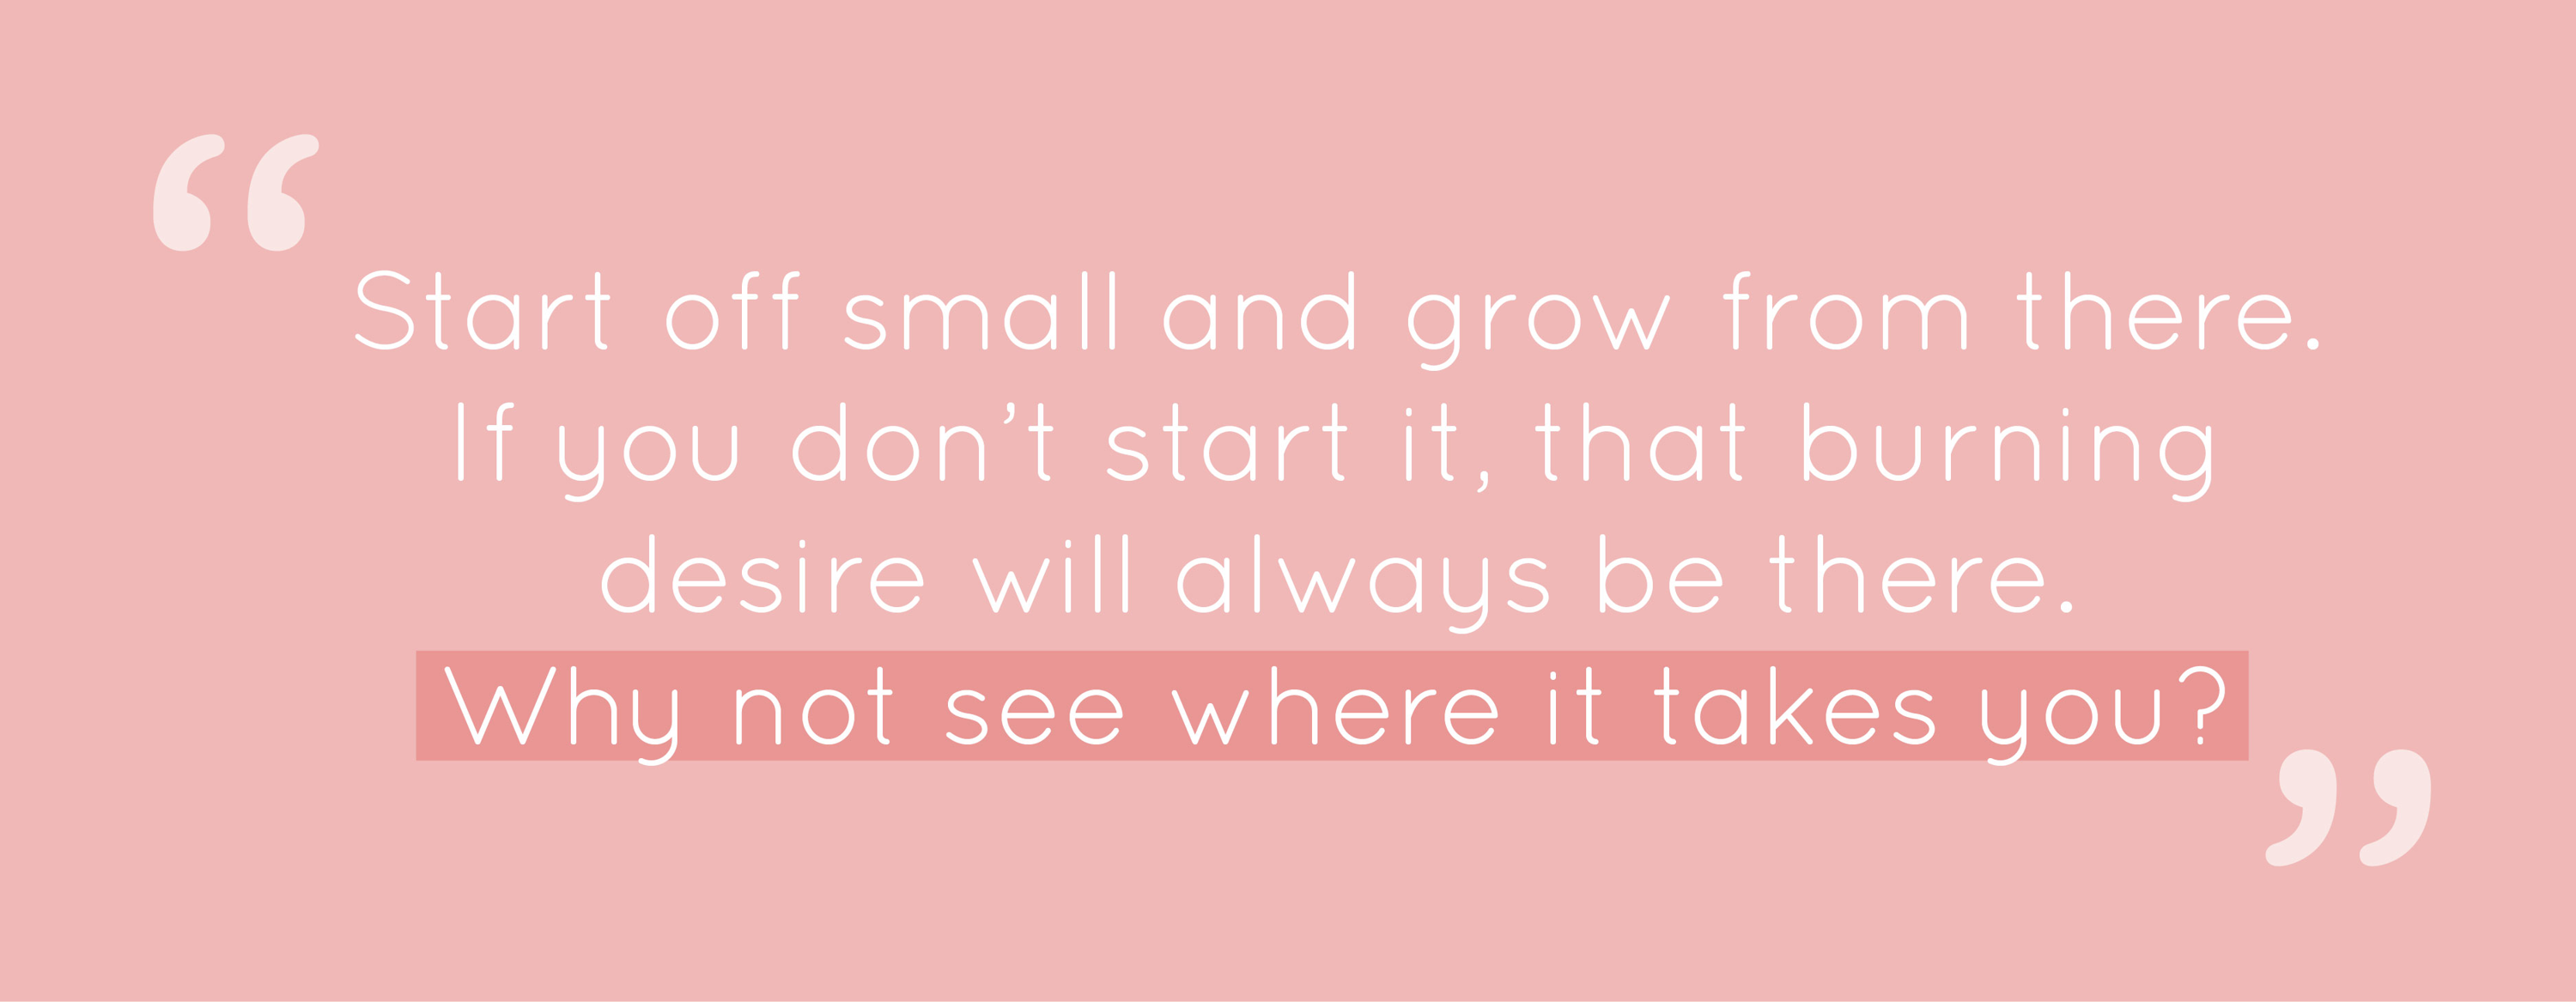 Start off small and grow from there. If you don't start it, that burning desire will always be there. Why not see where it takes you?